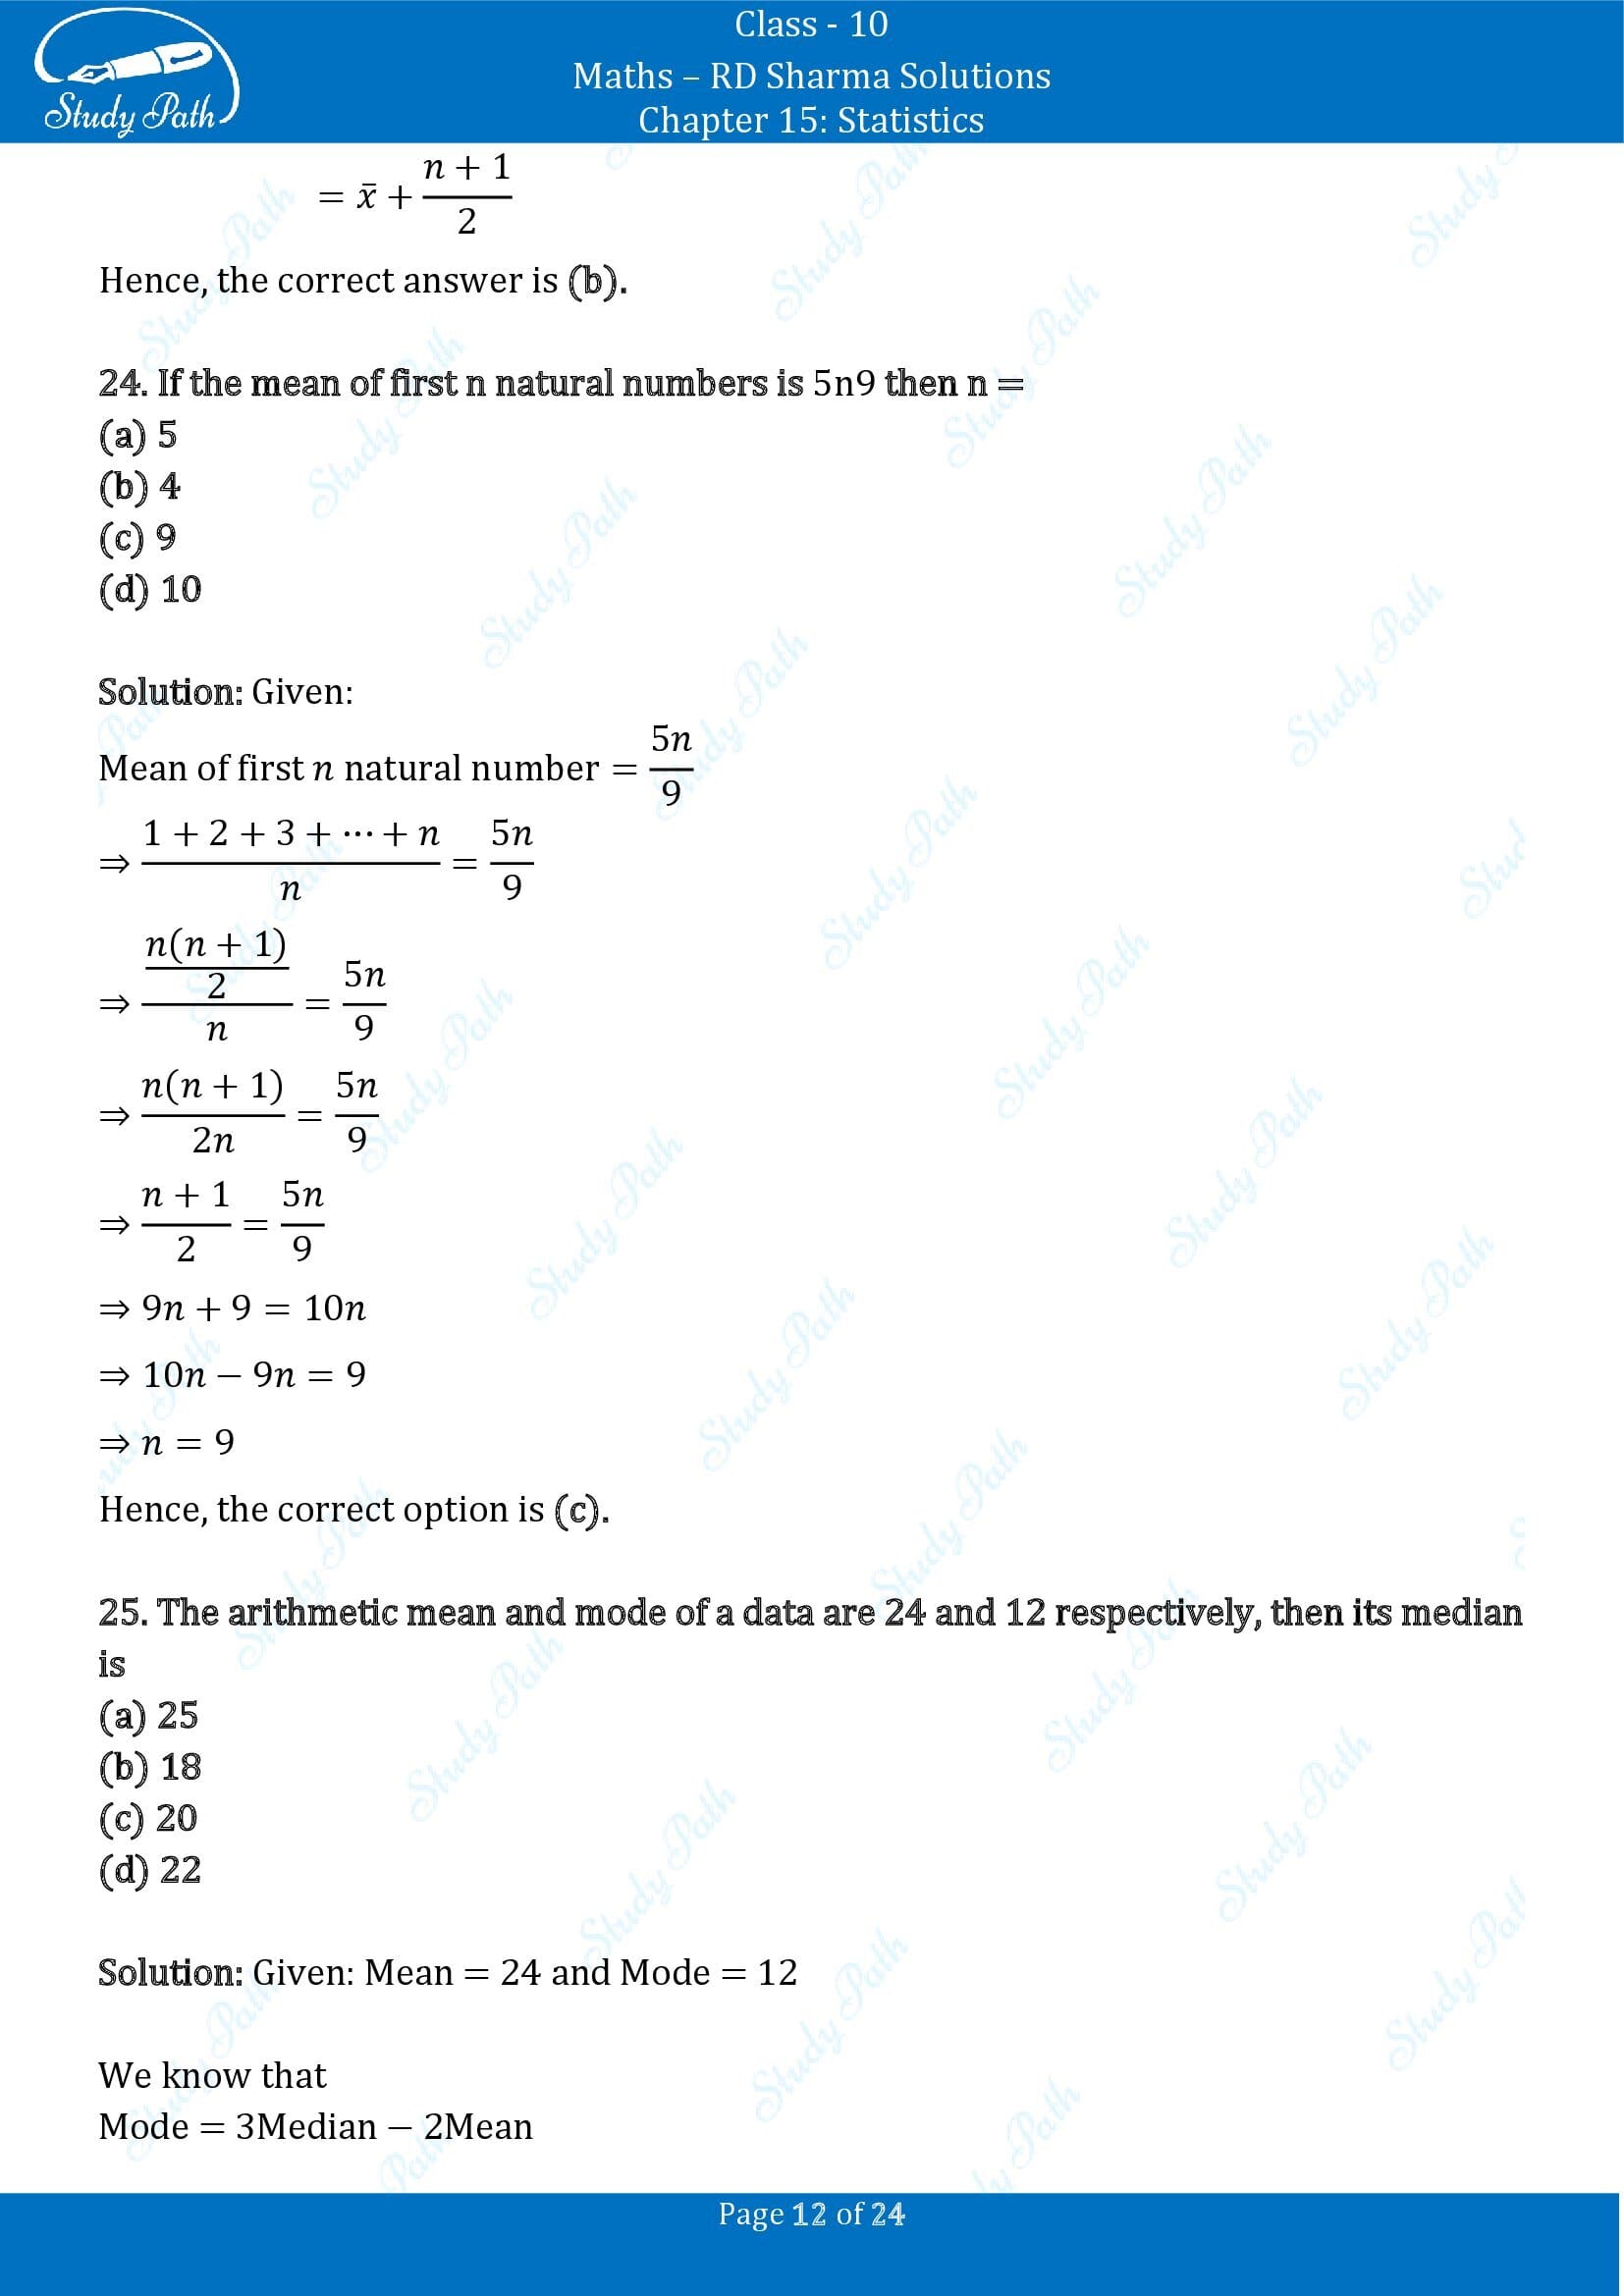 RD Sharma Solutions Class 10 Chapter 15 Statistics Multiple Choice Question MCQs 00012